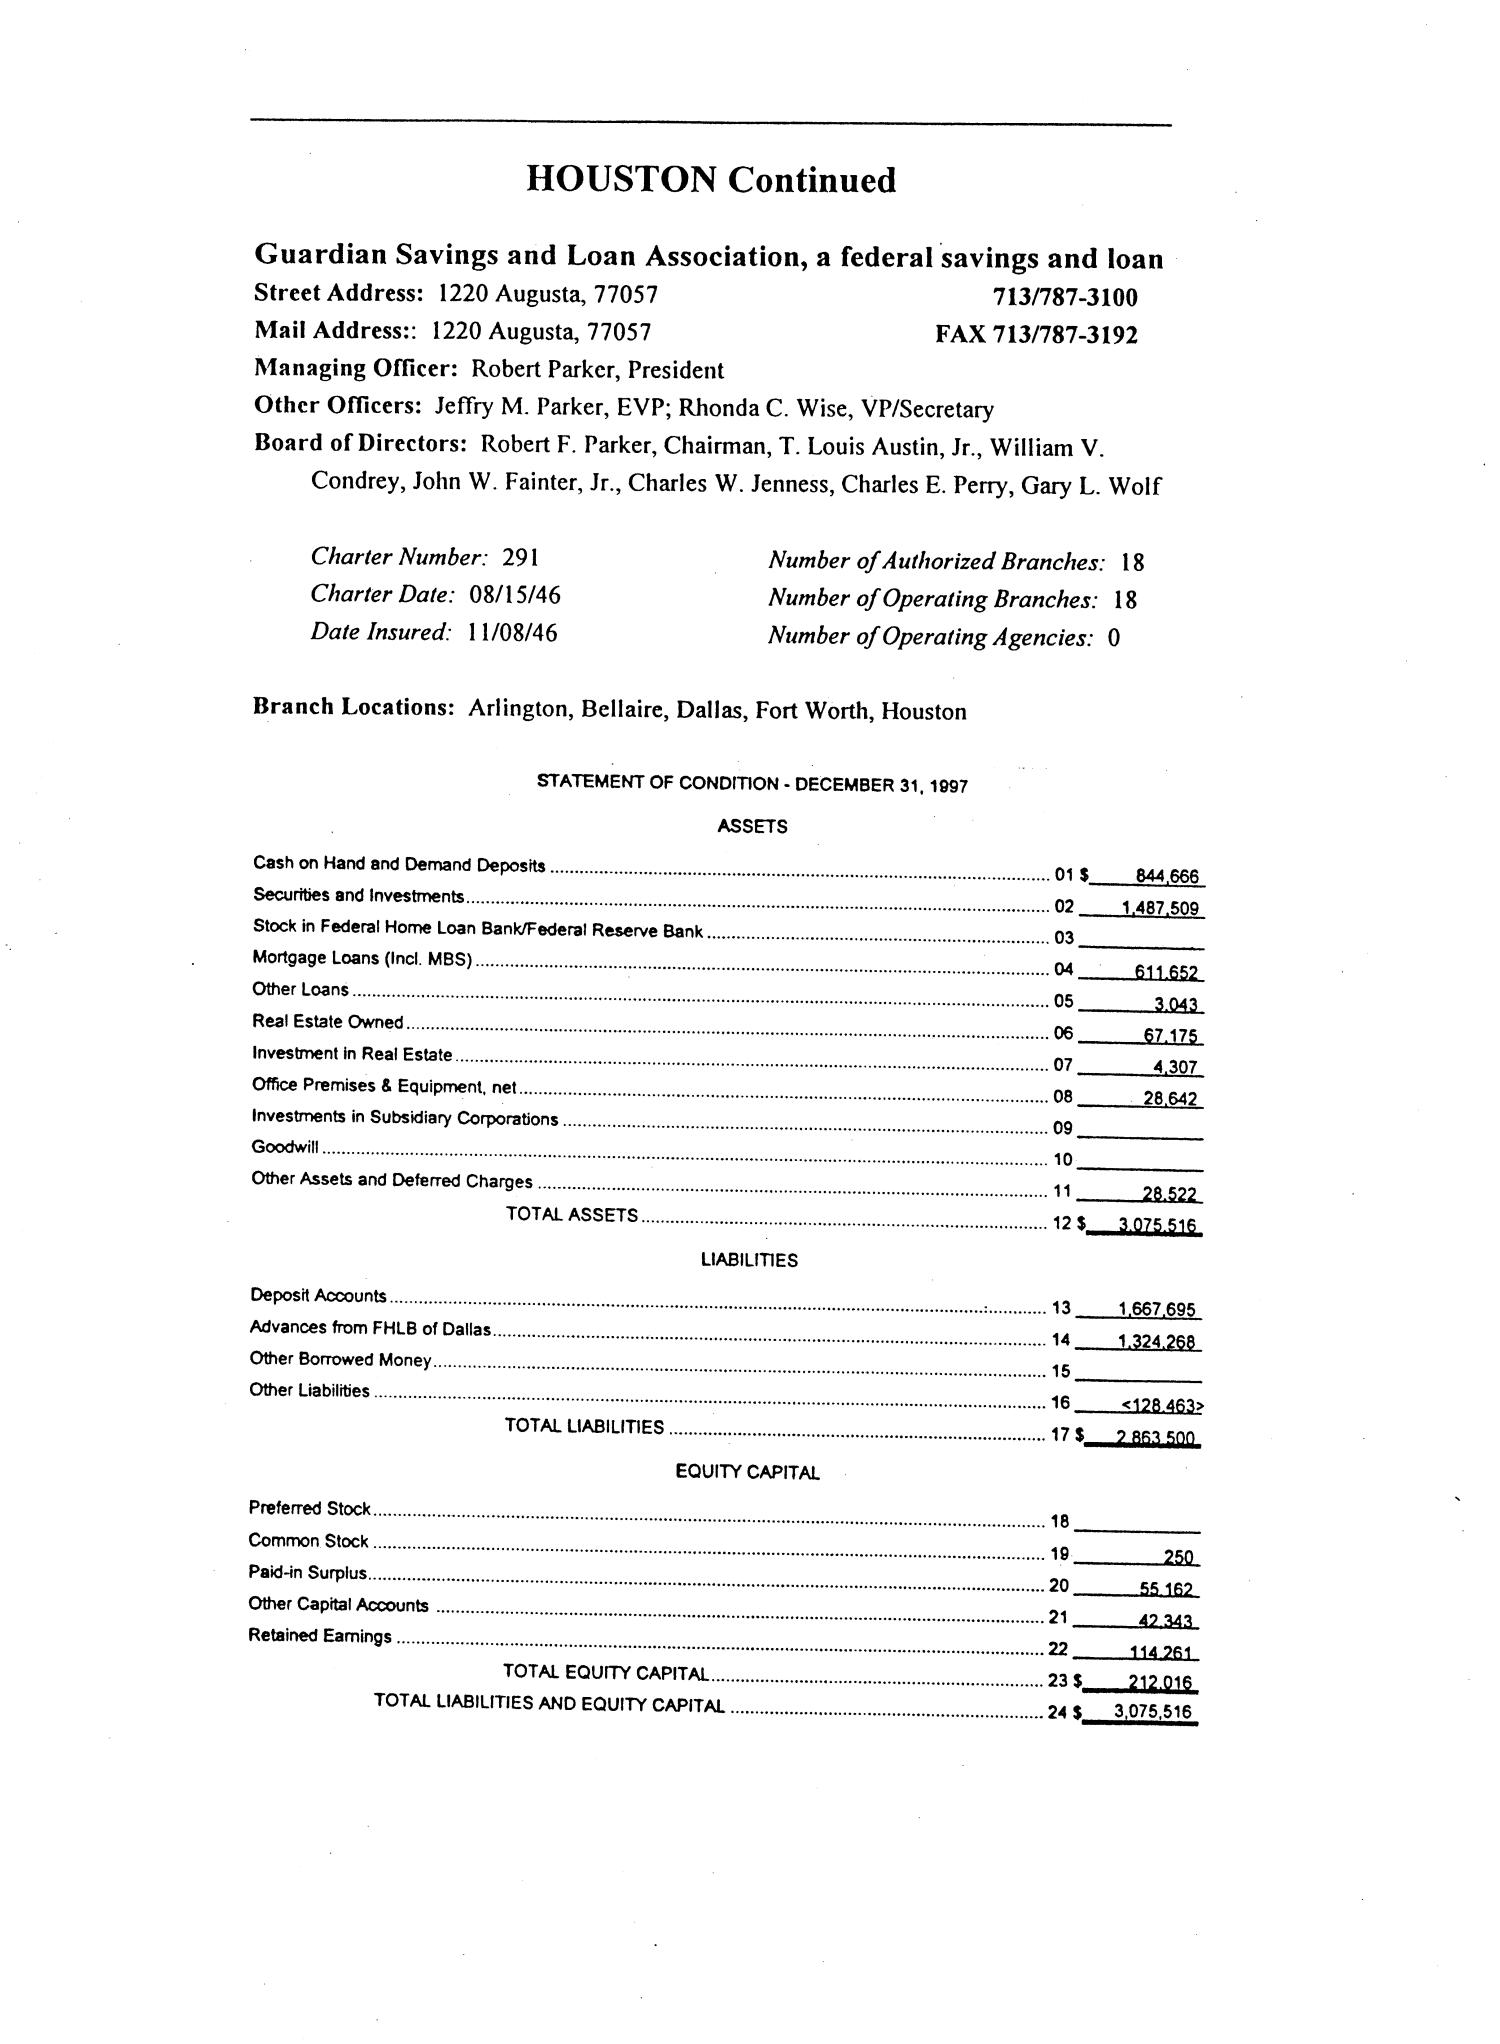 Texas Savings and Loan Department Savings Institutions Annual Report: 1997
                                                
                                                    Houston
                                                